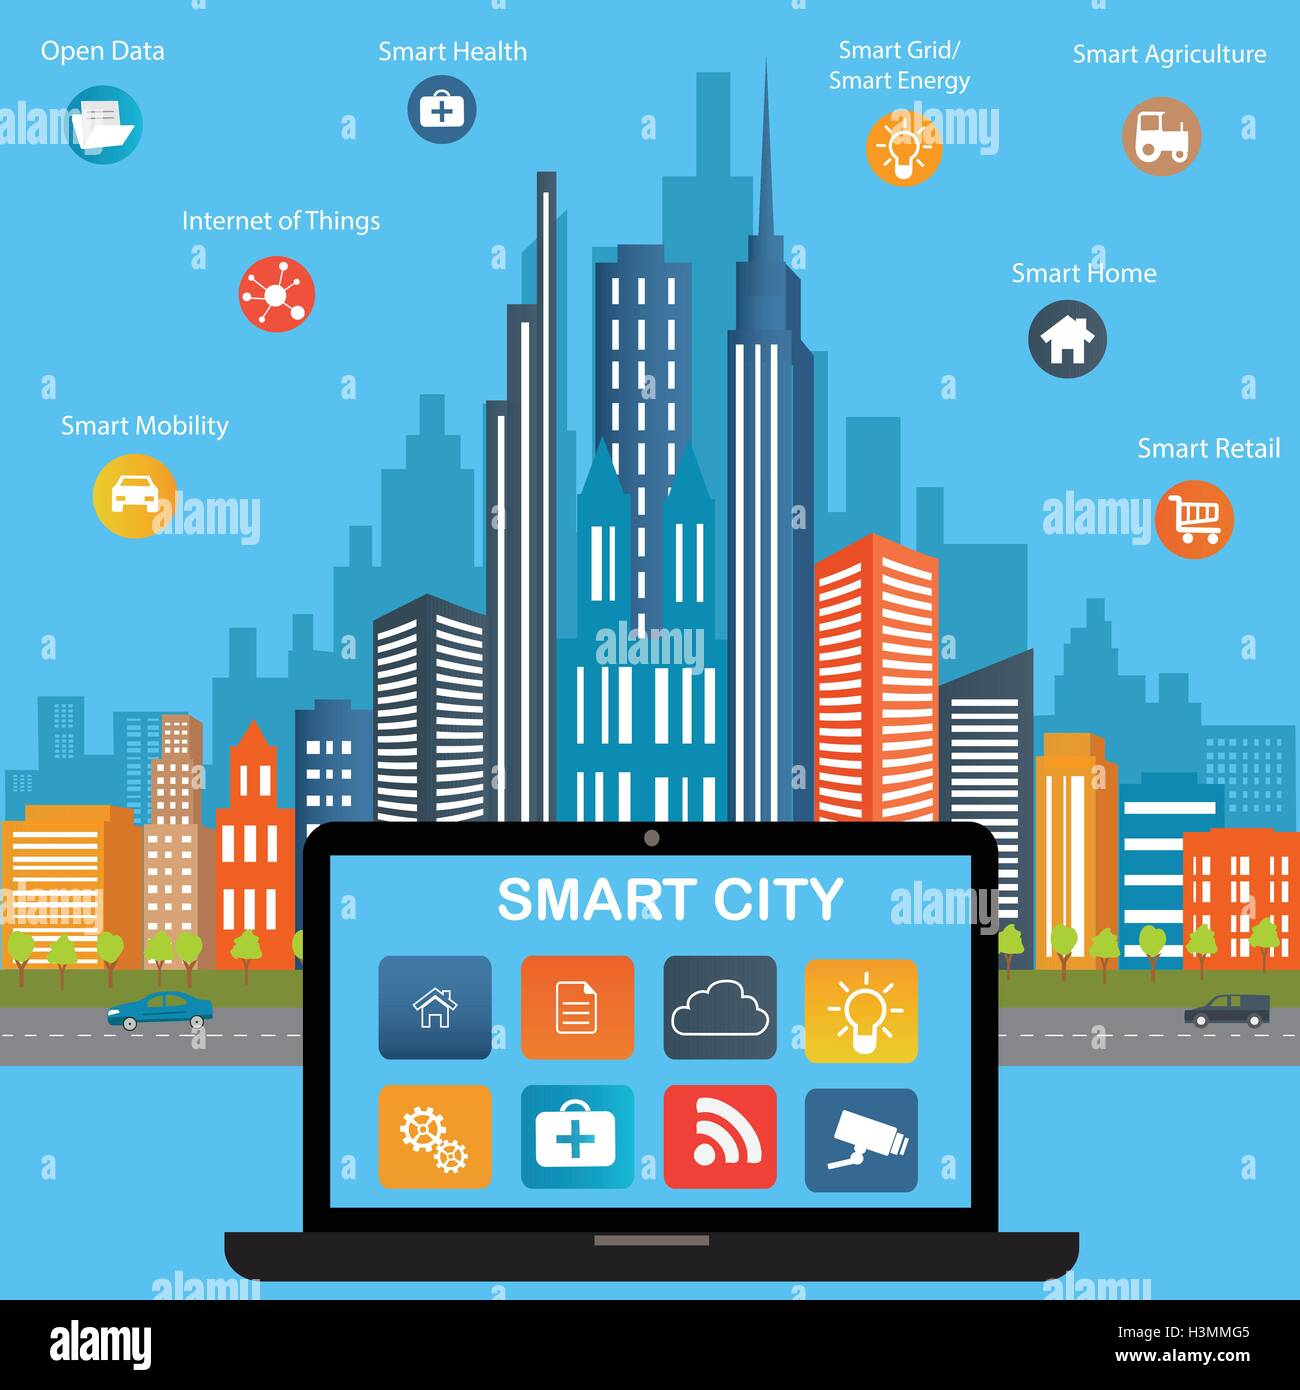 Smart city concept with different icon and elements. Modern city design with  future technology for living. Stock Vector